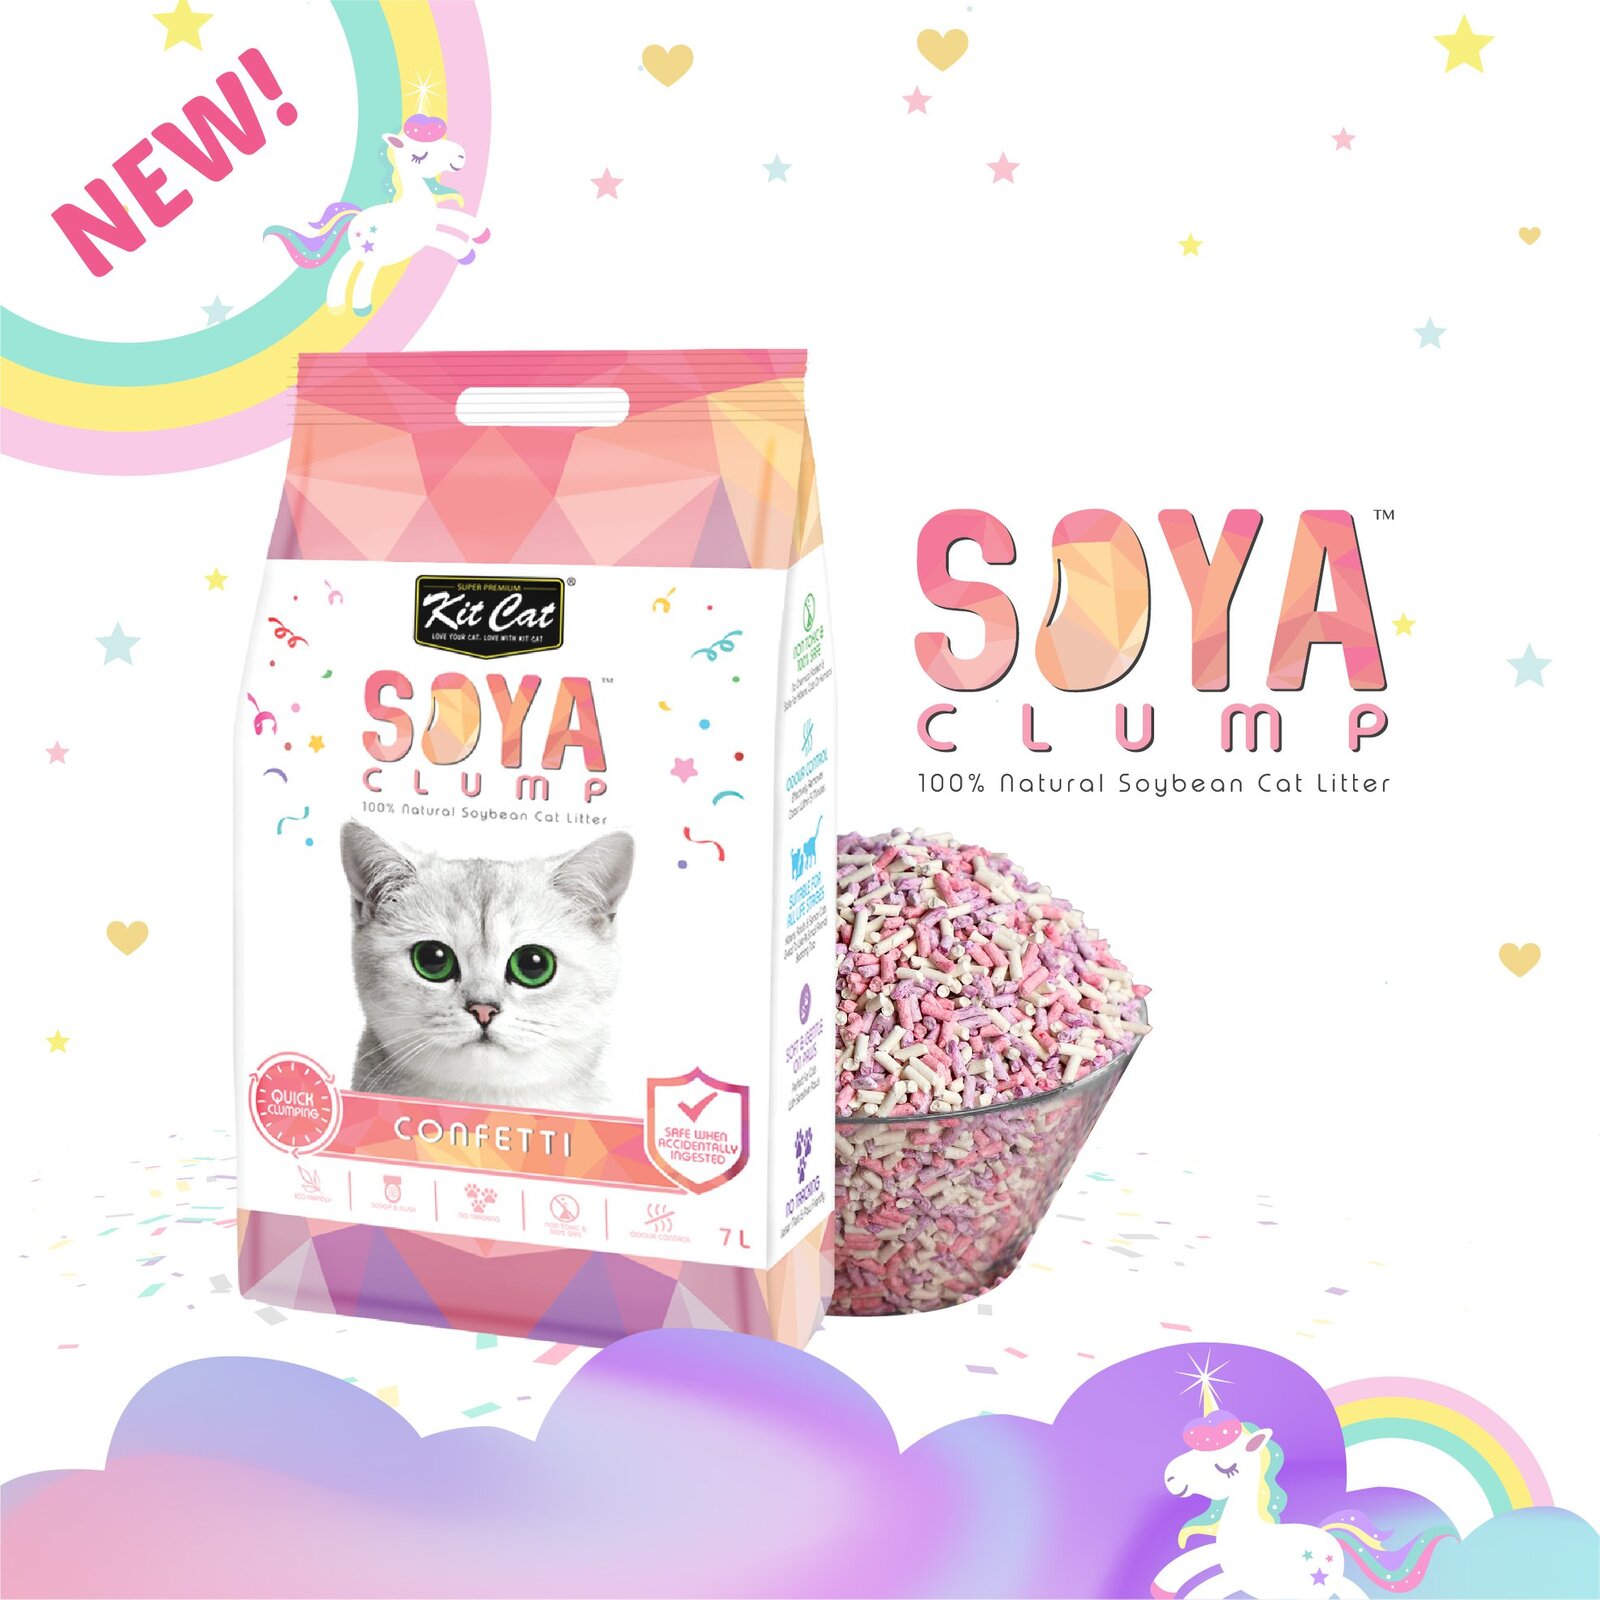 Kit Cat Soya Clumping Cat Litter made from Soybean Waste - Confetti 7 Litres image 1